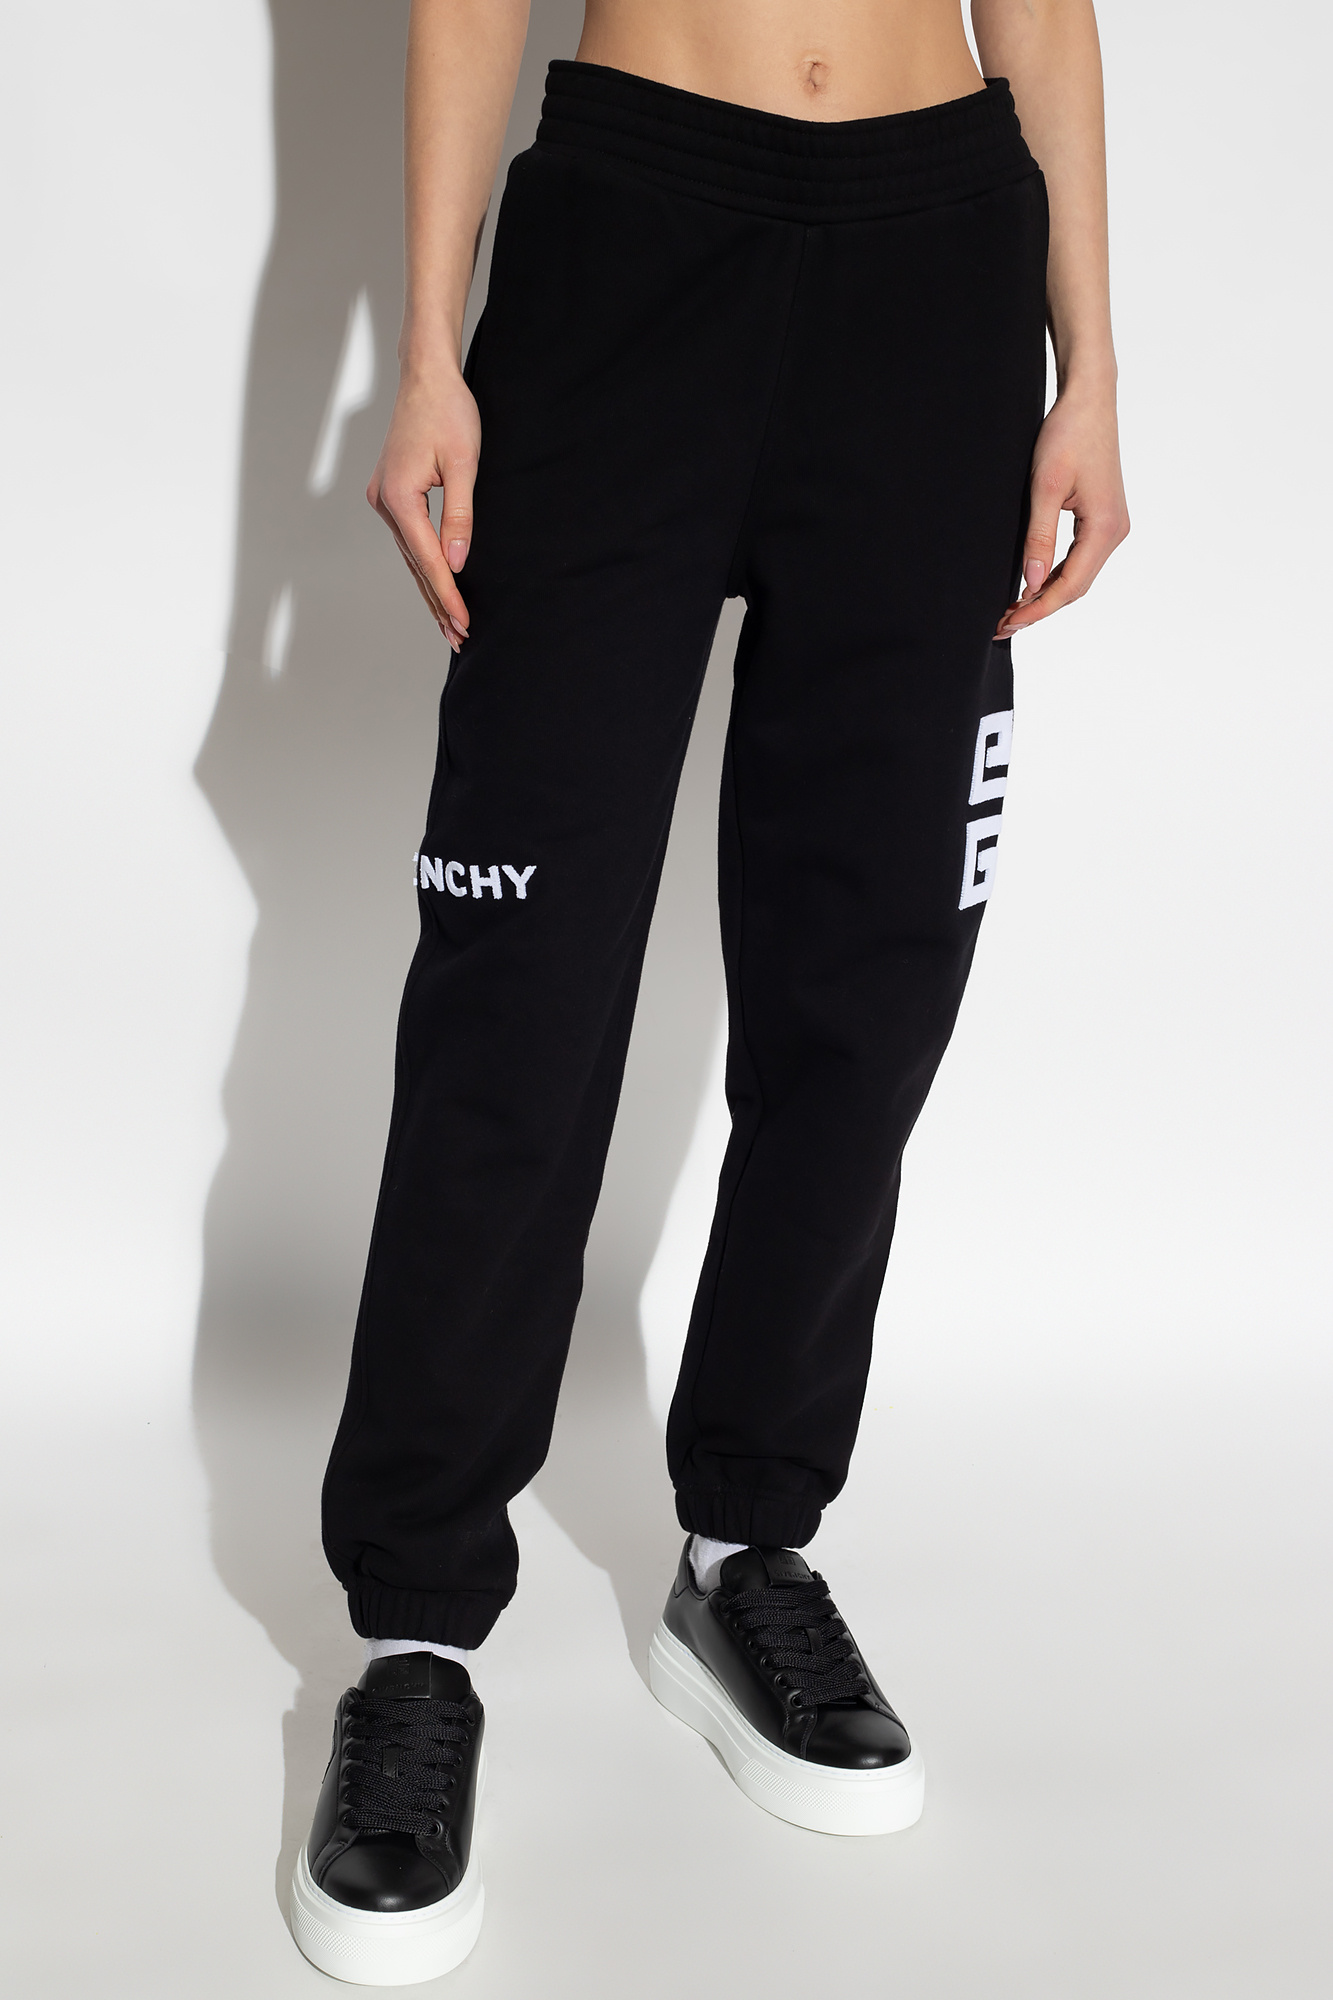 Givenchy Sweatpants with logo, Women's Clothing